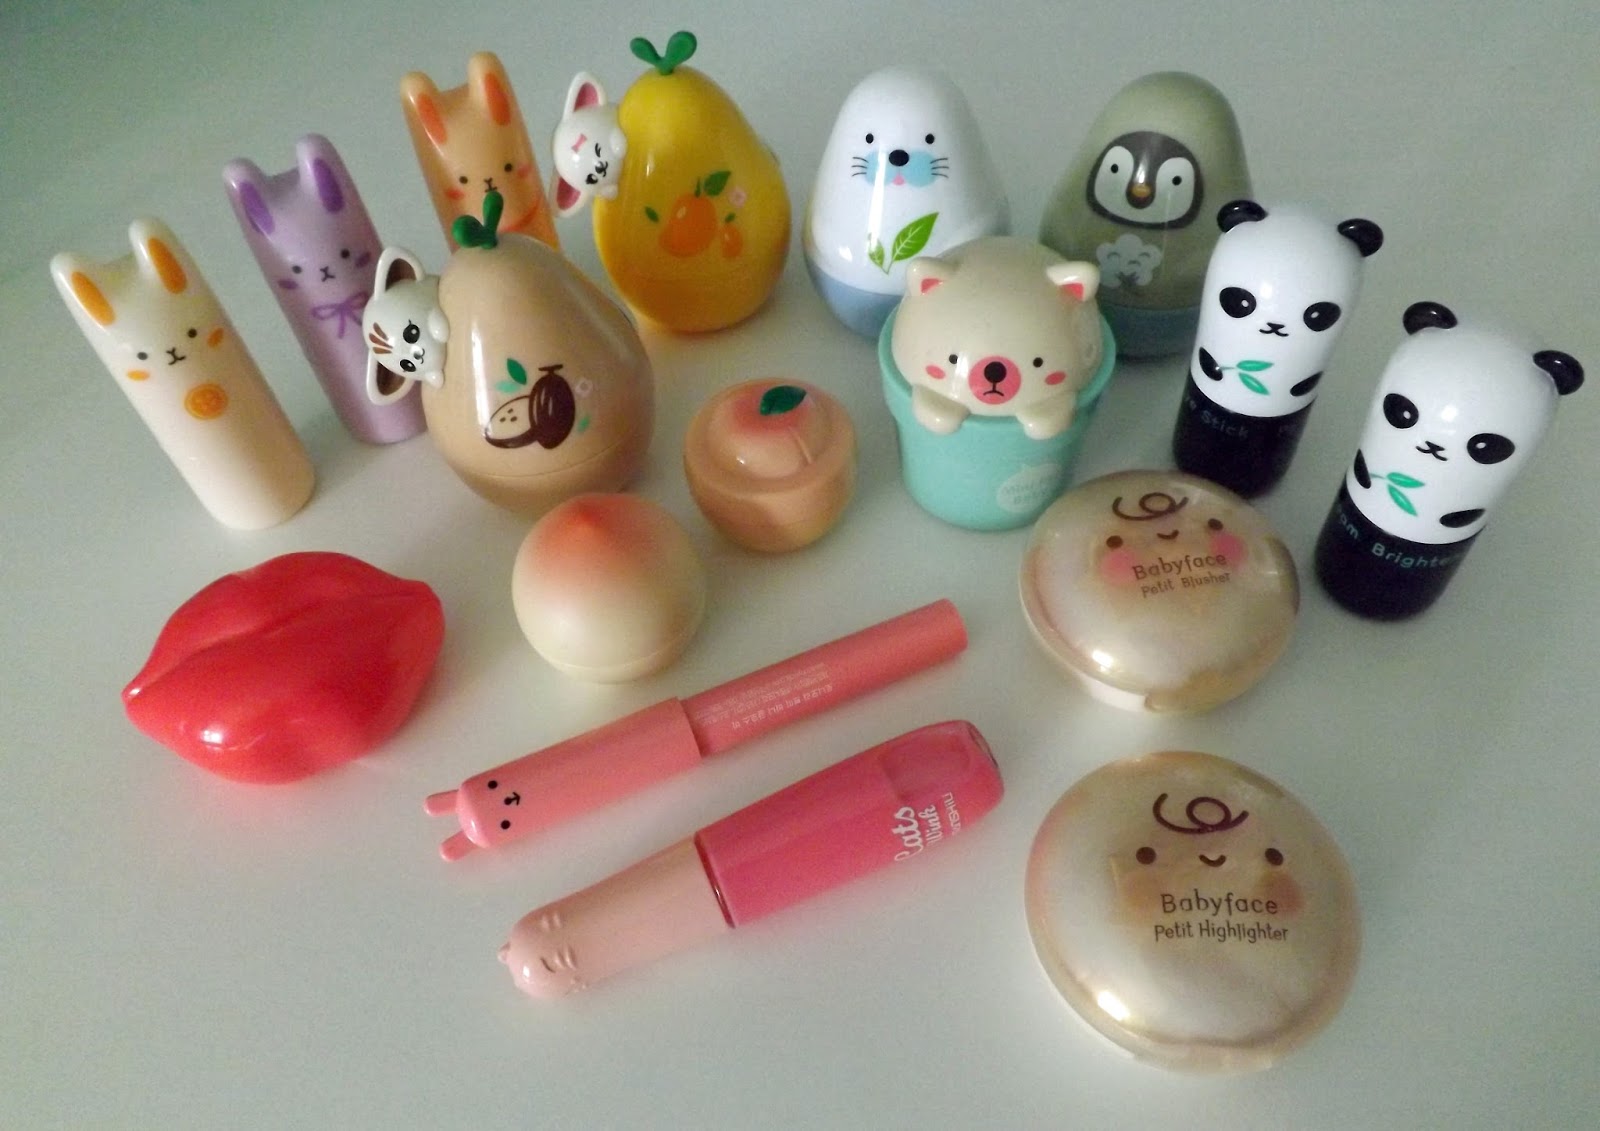 Bits And Bobs: Korean Beauty Products